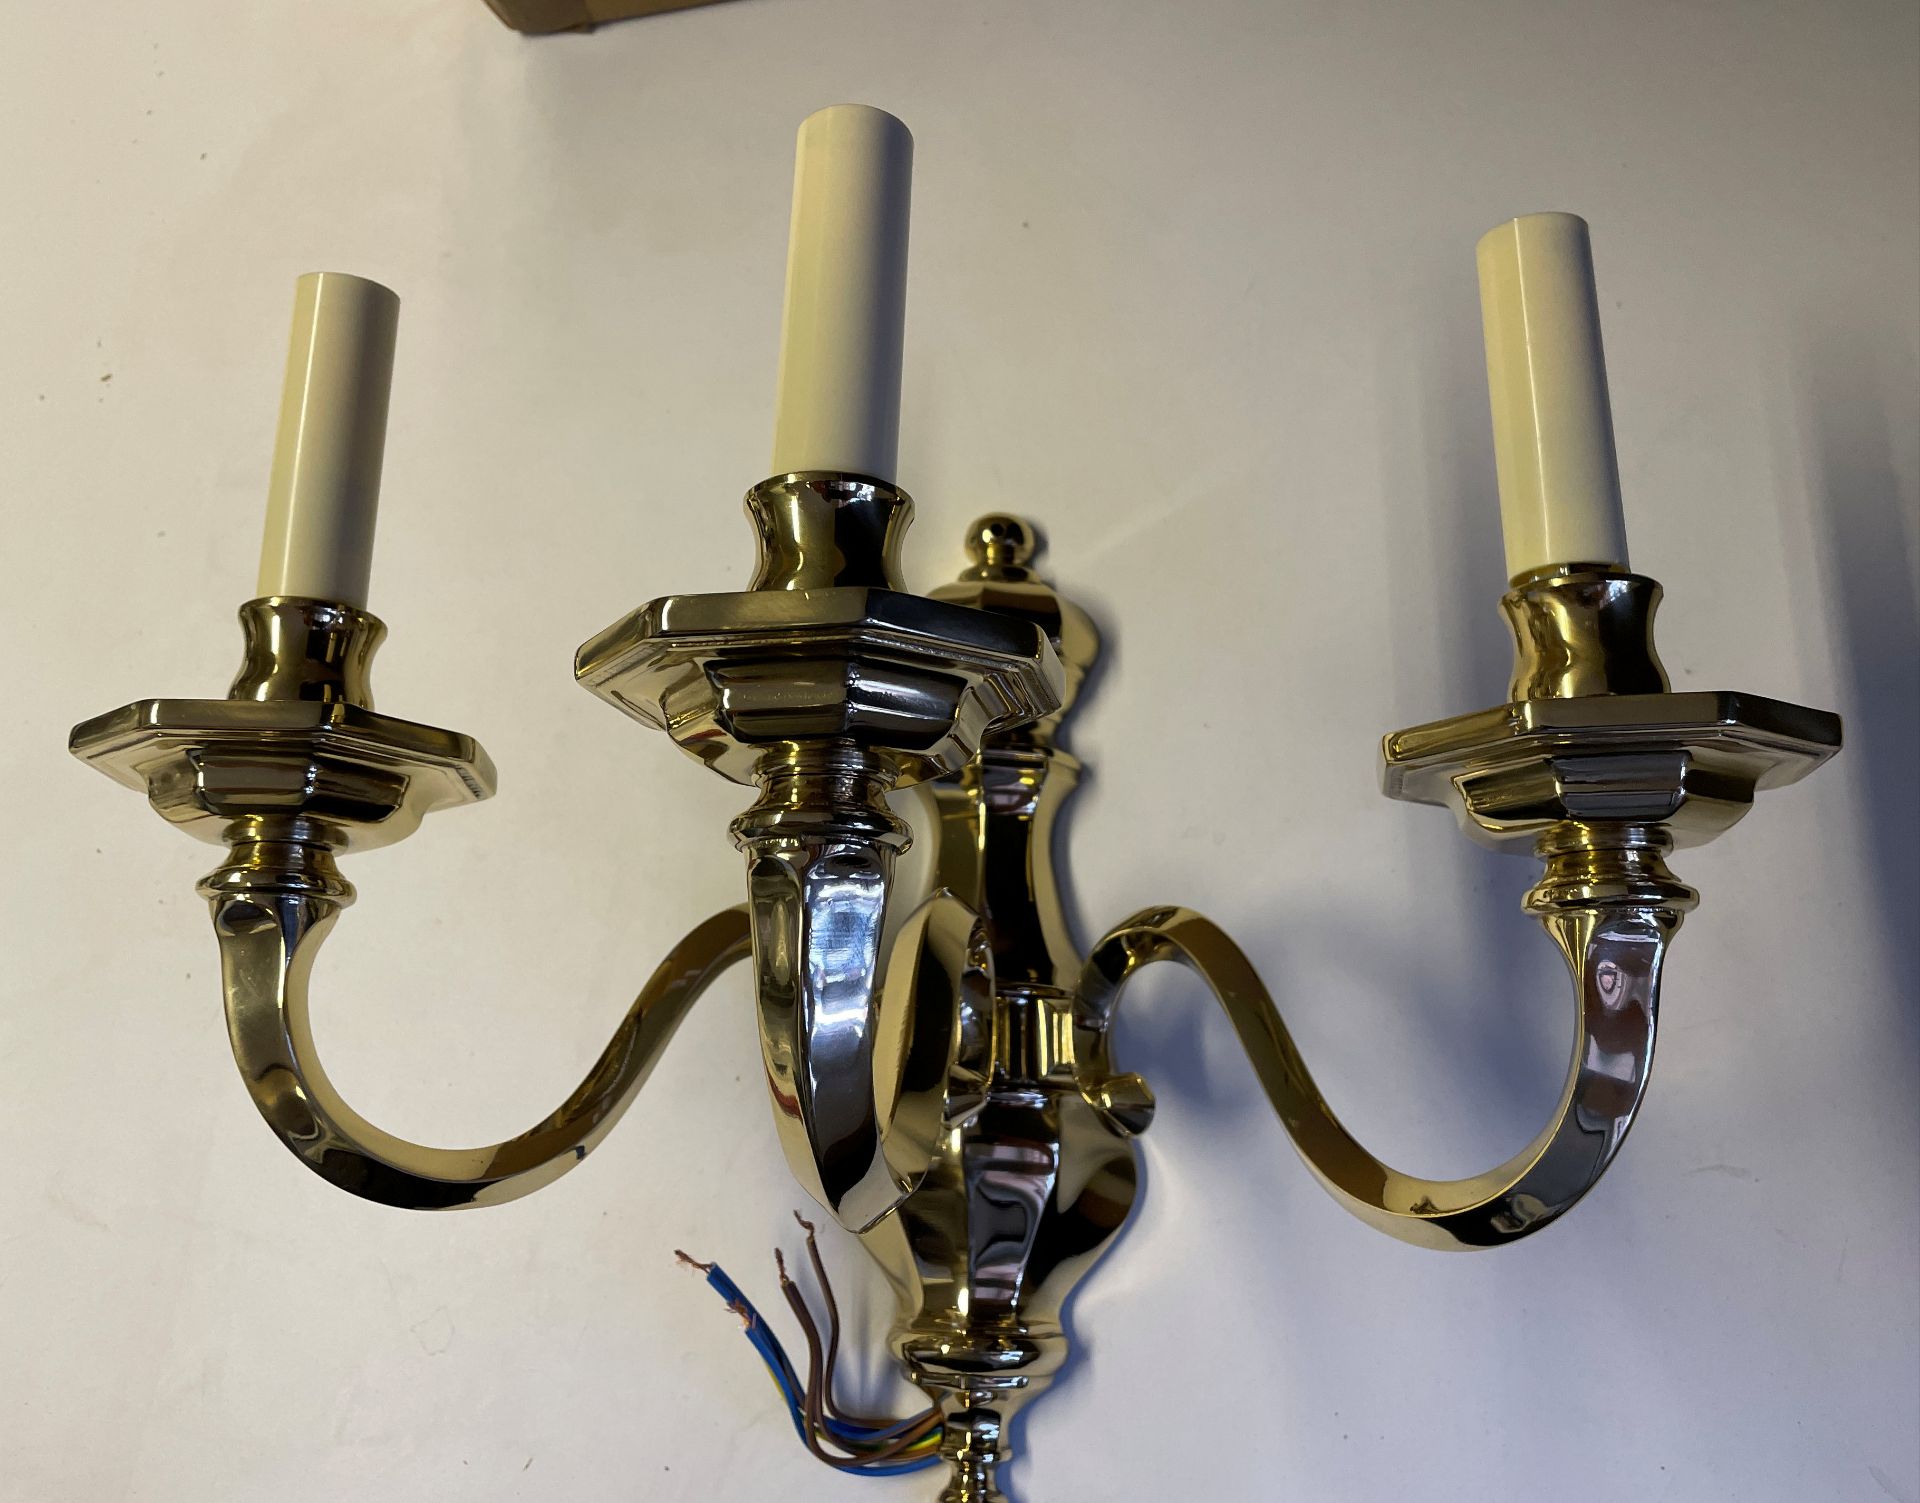 1 x Chelsom Substantial Wall Sconce with 3 Arms - Arm to arm 45cm x Height 34cm - designed exclusive - Image 10 of 12